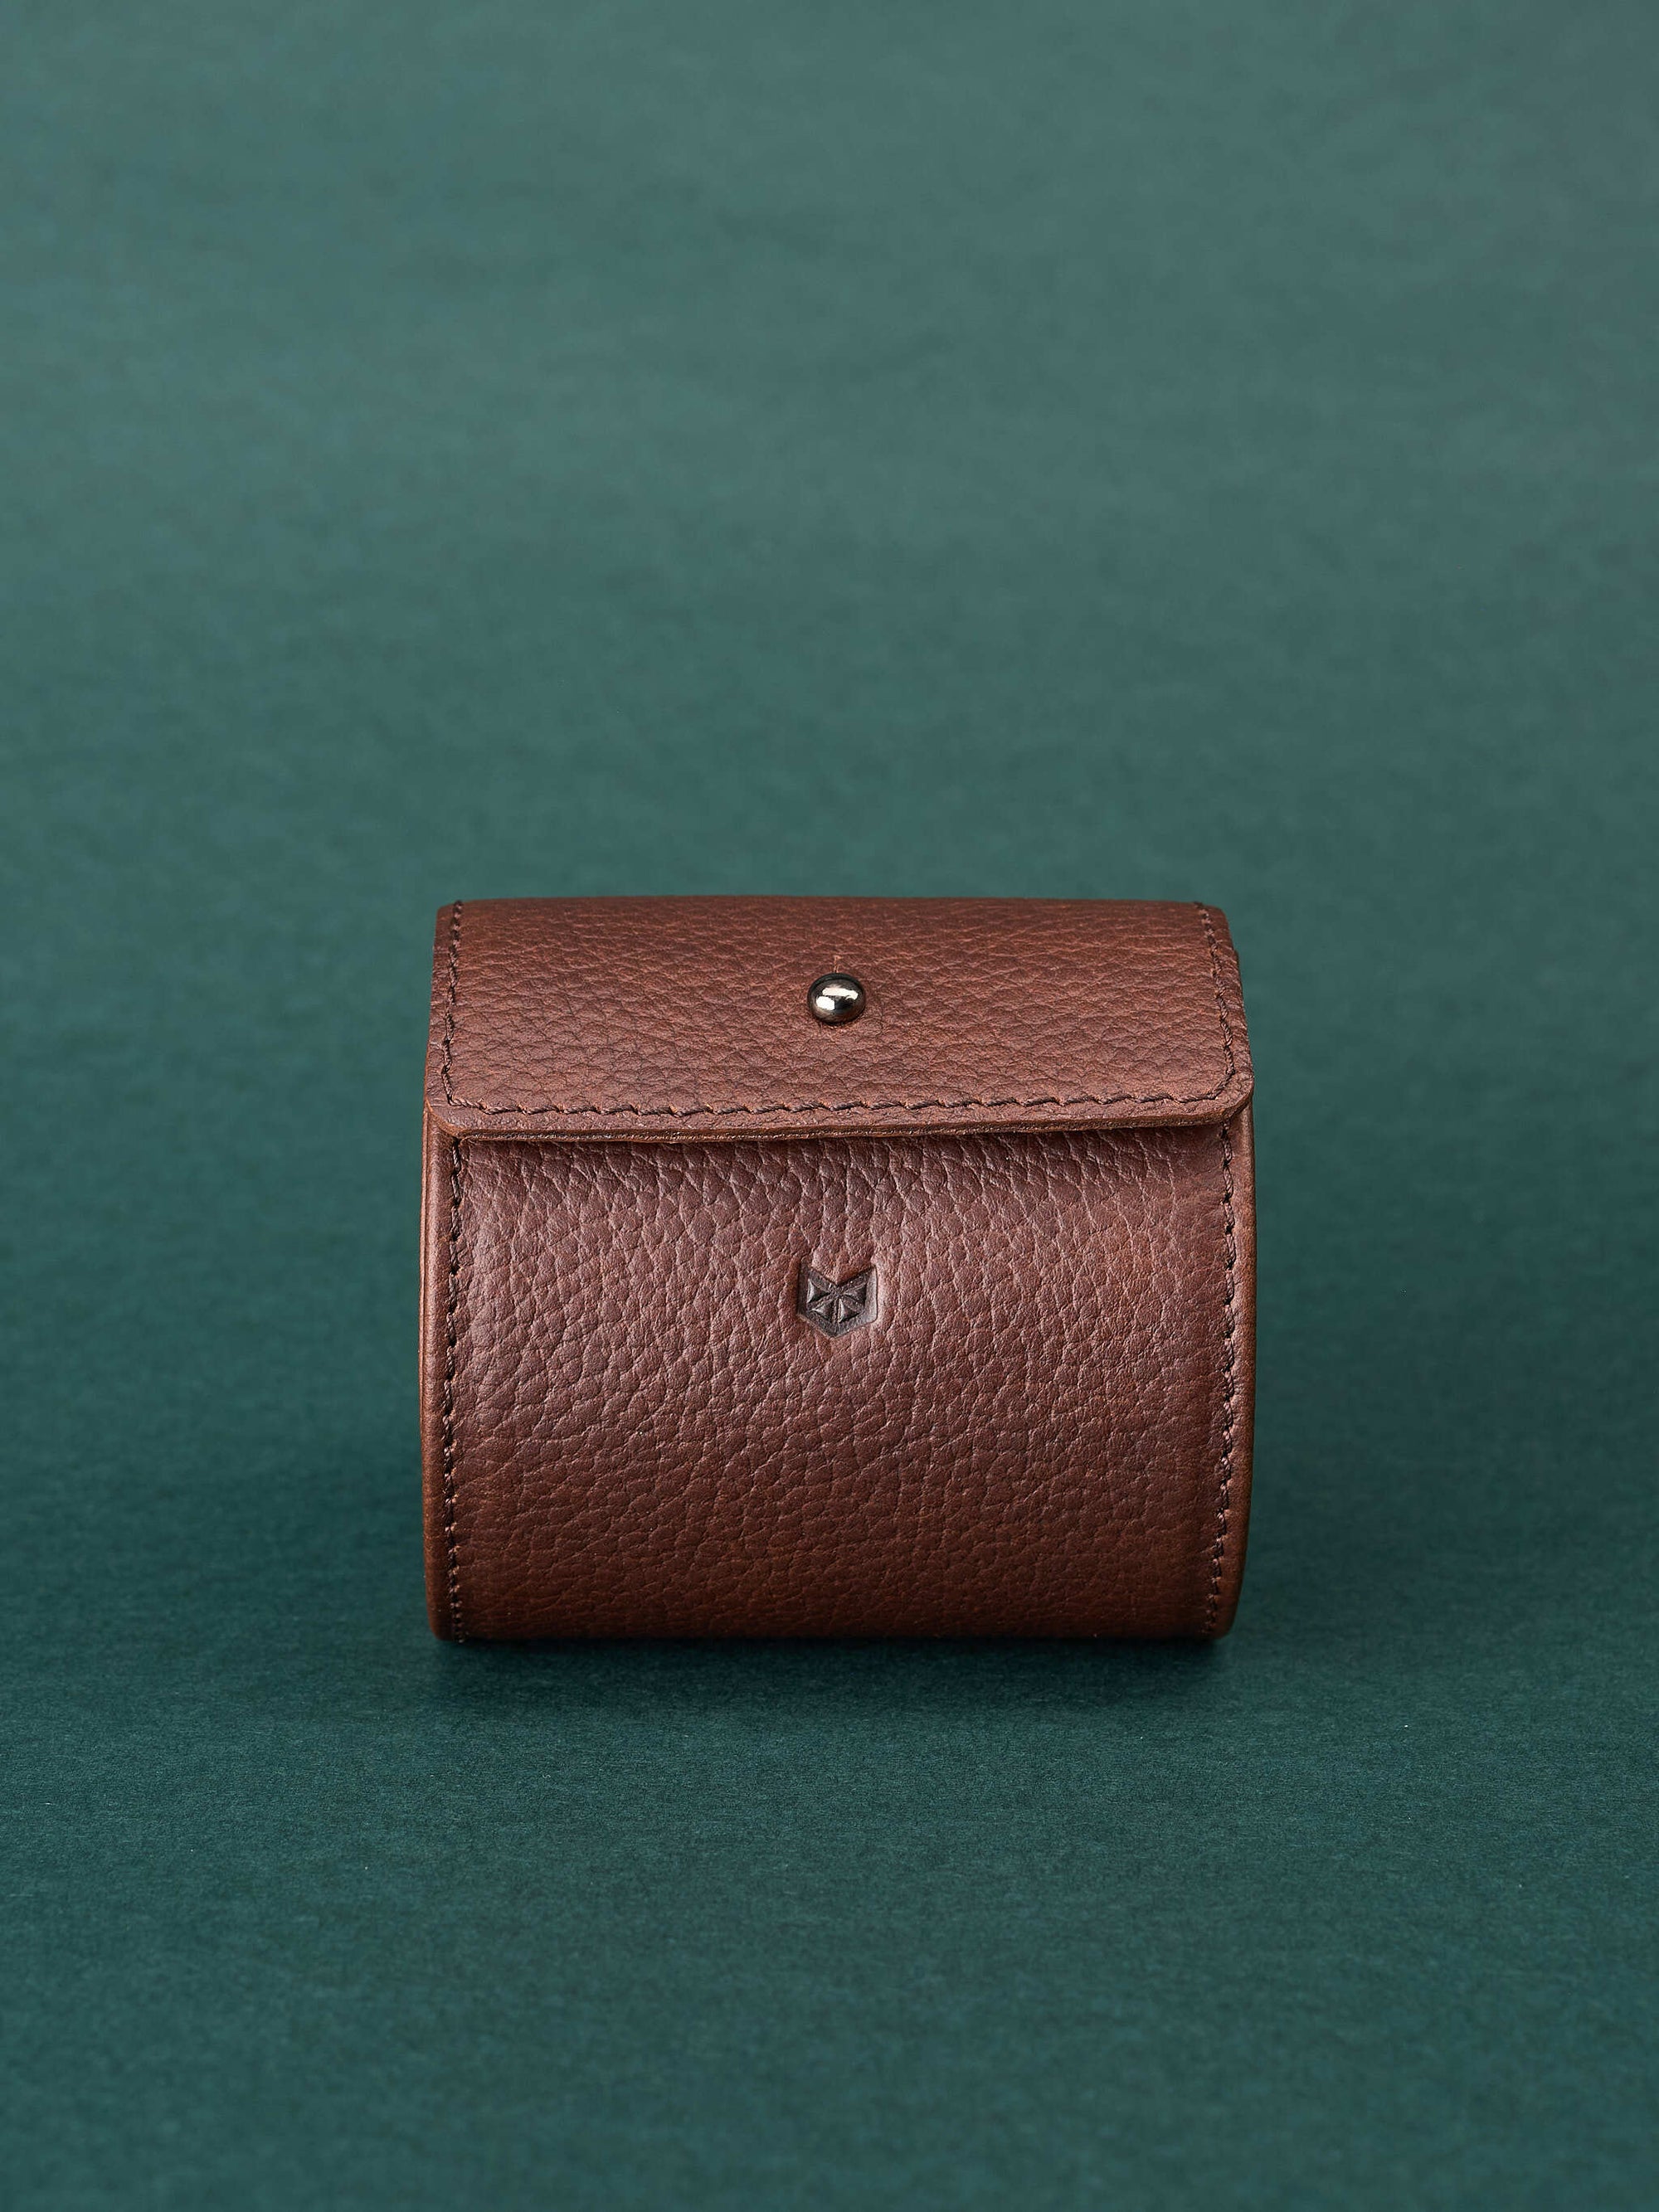 Travel watch case. Single watch display case brown by Capra Leather